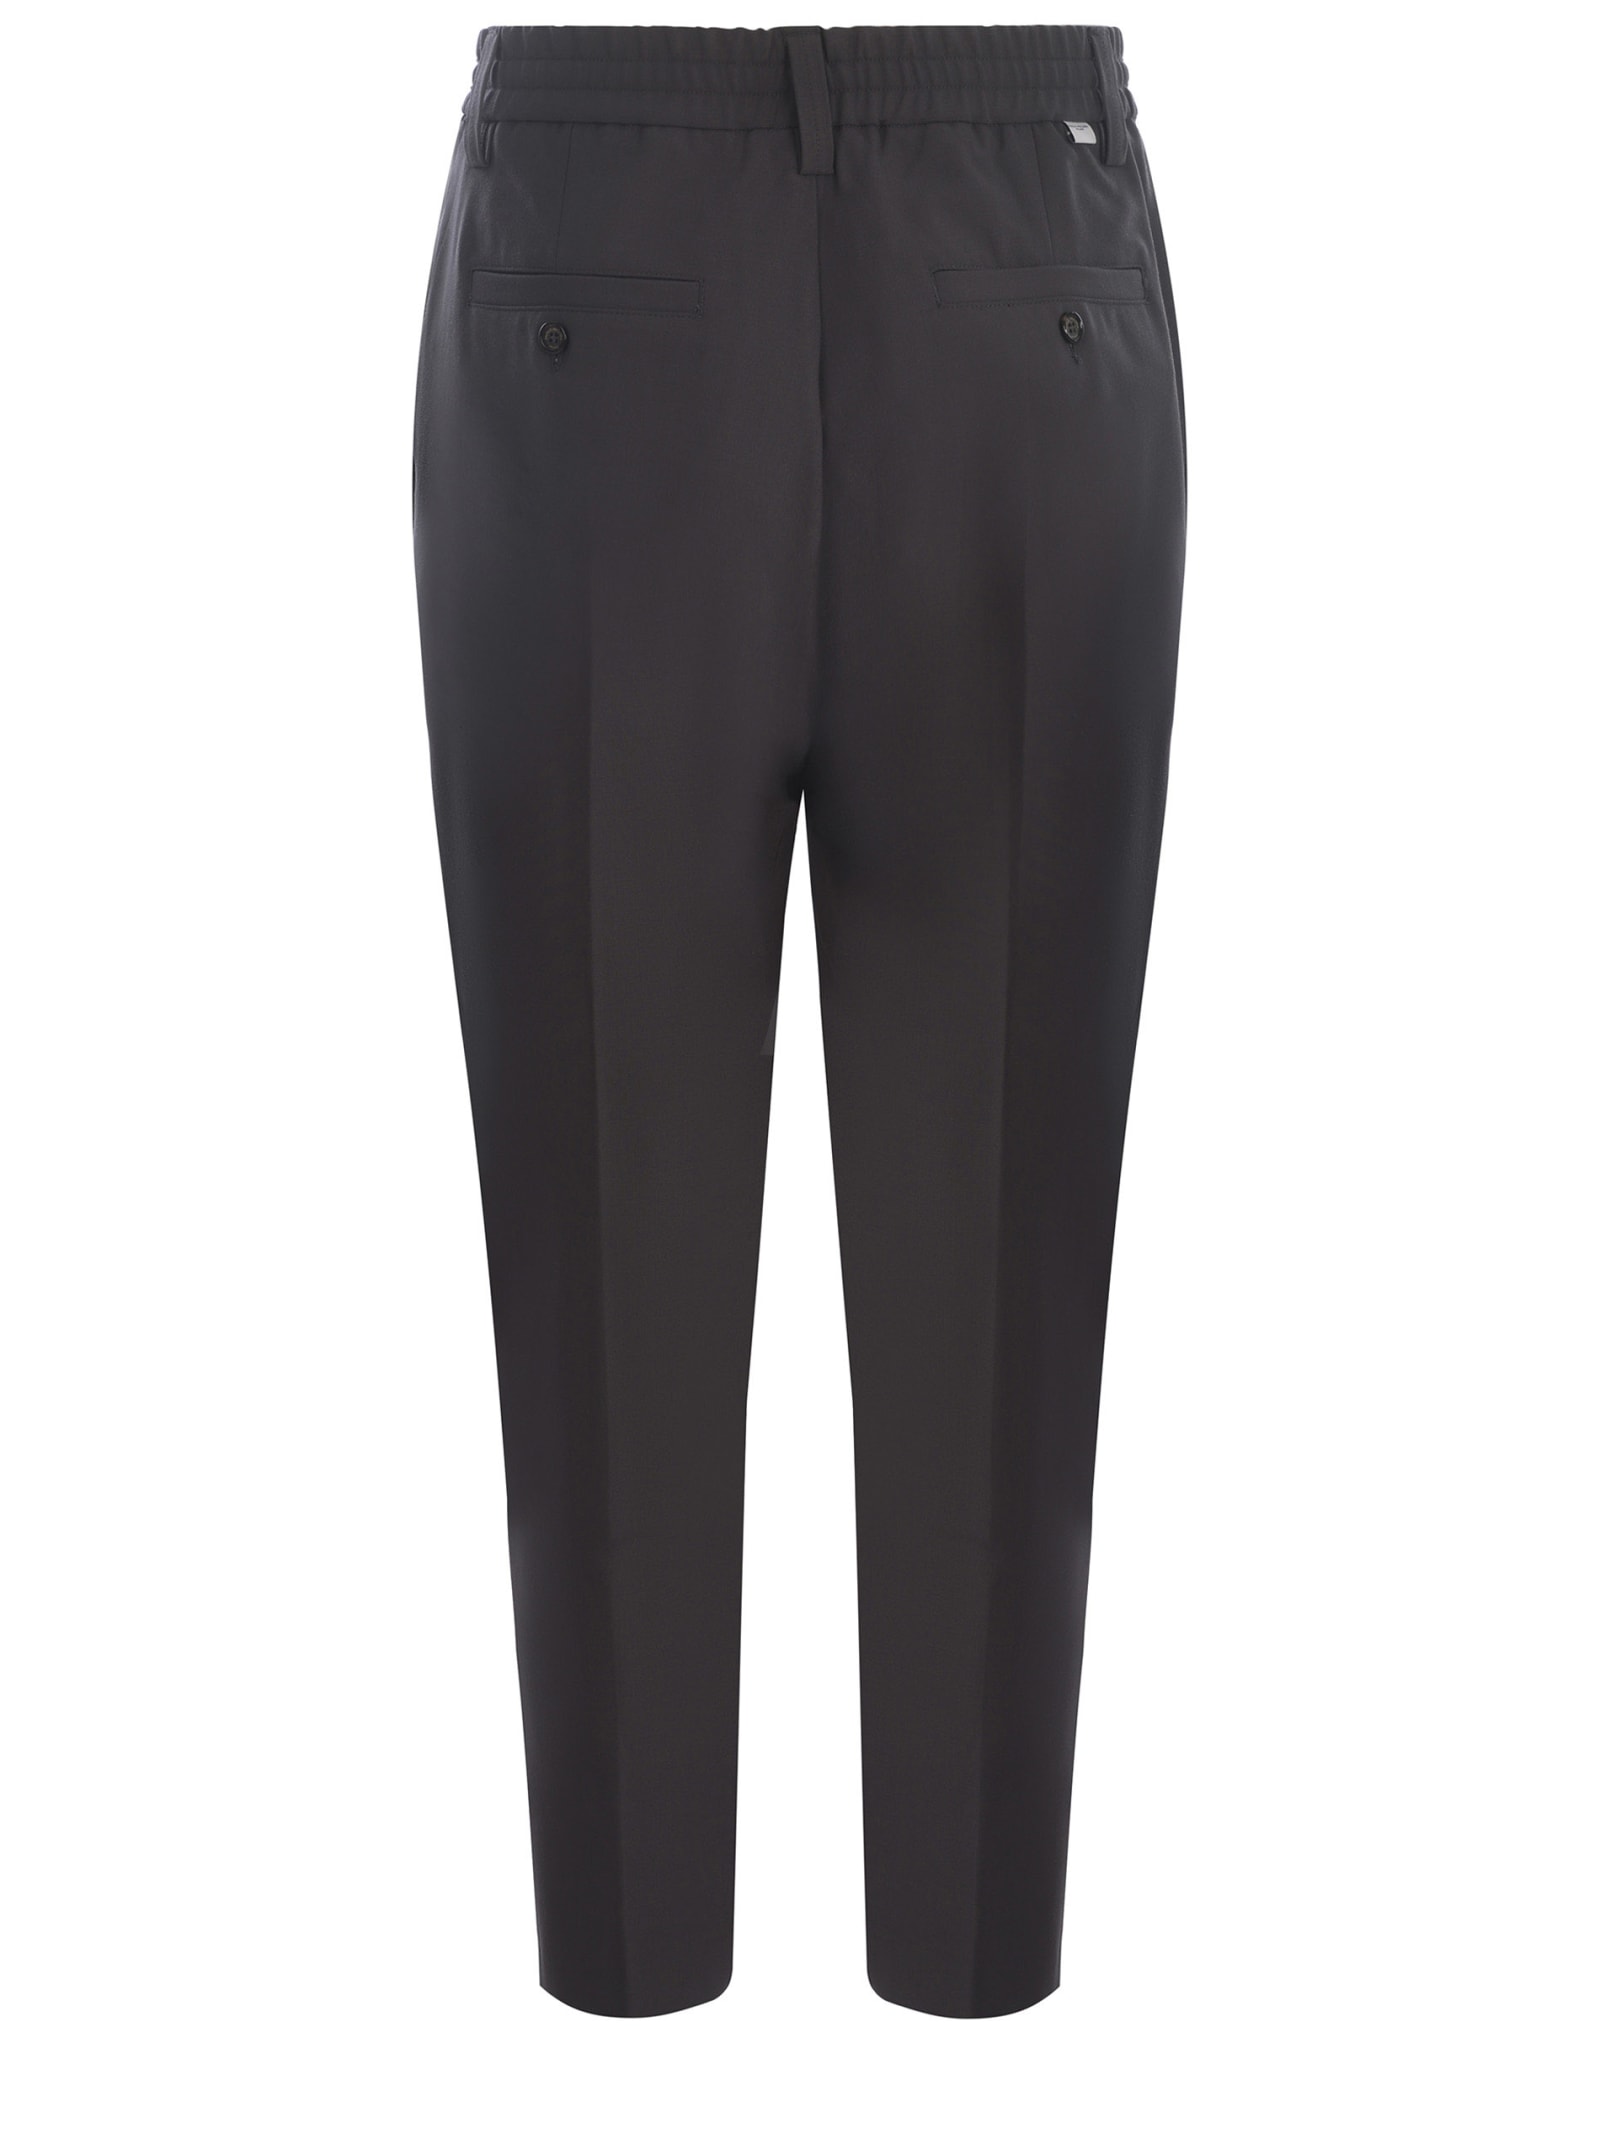 Shop Paolo Pecora Trousers  Made Of Fresh Wool In Grigio Antracite